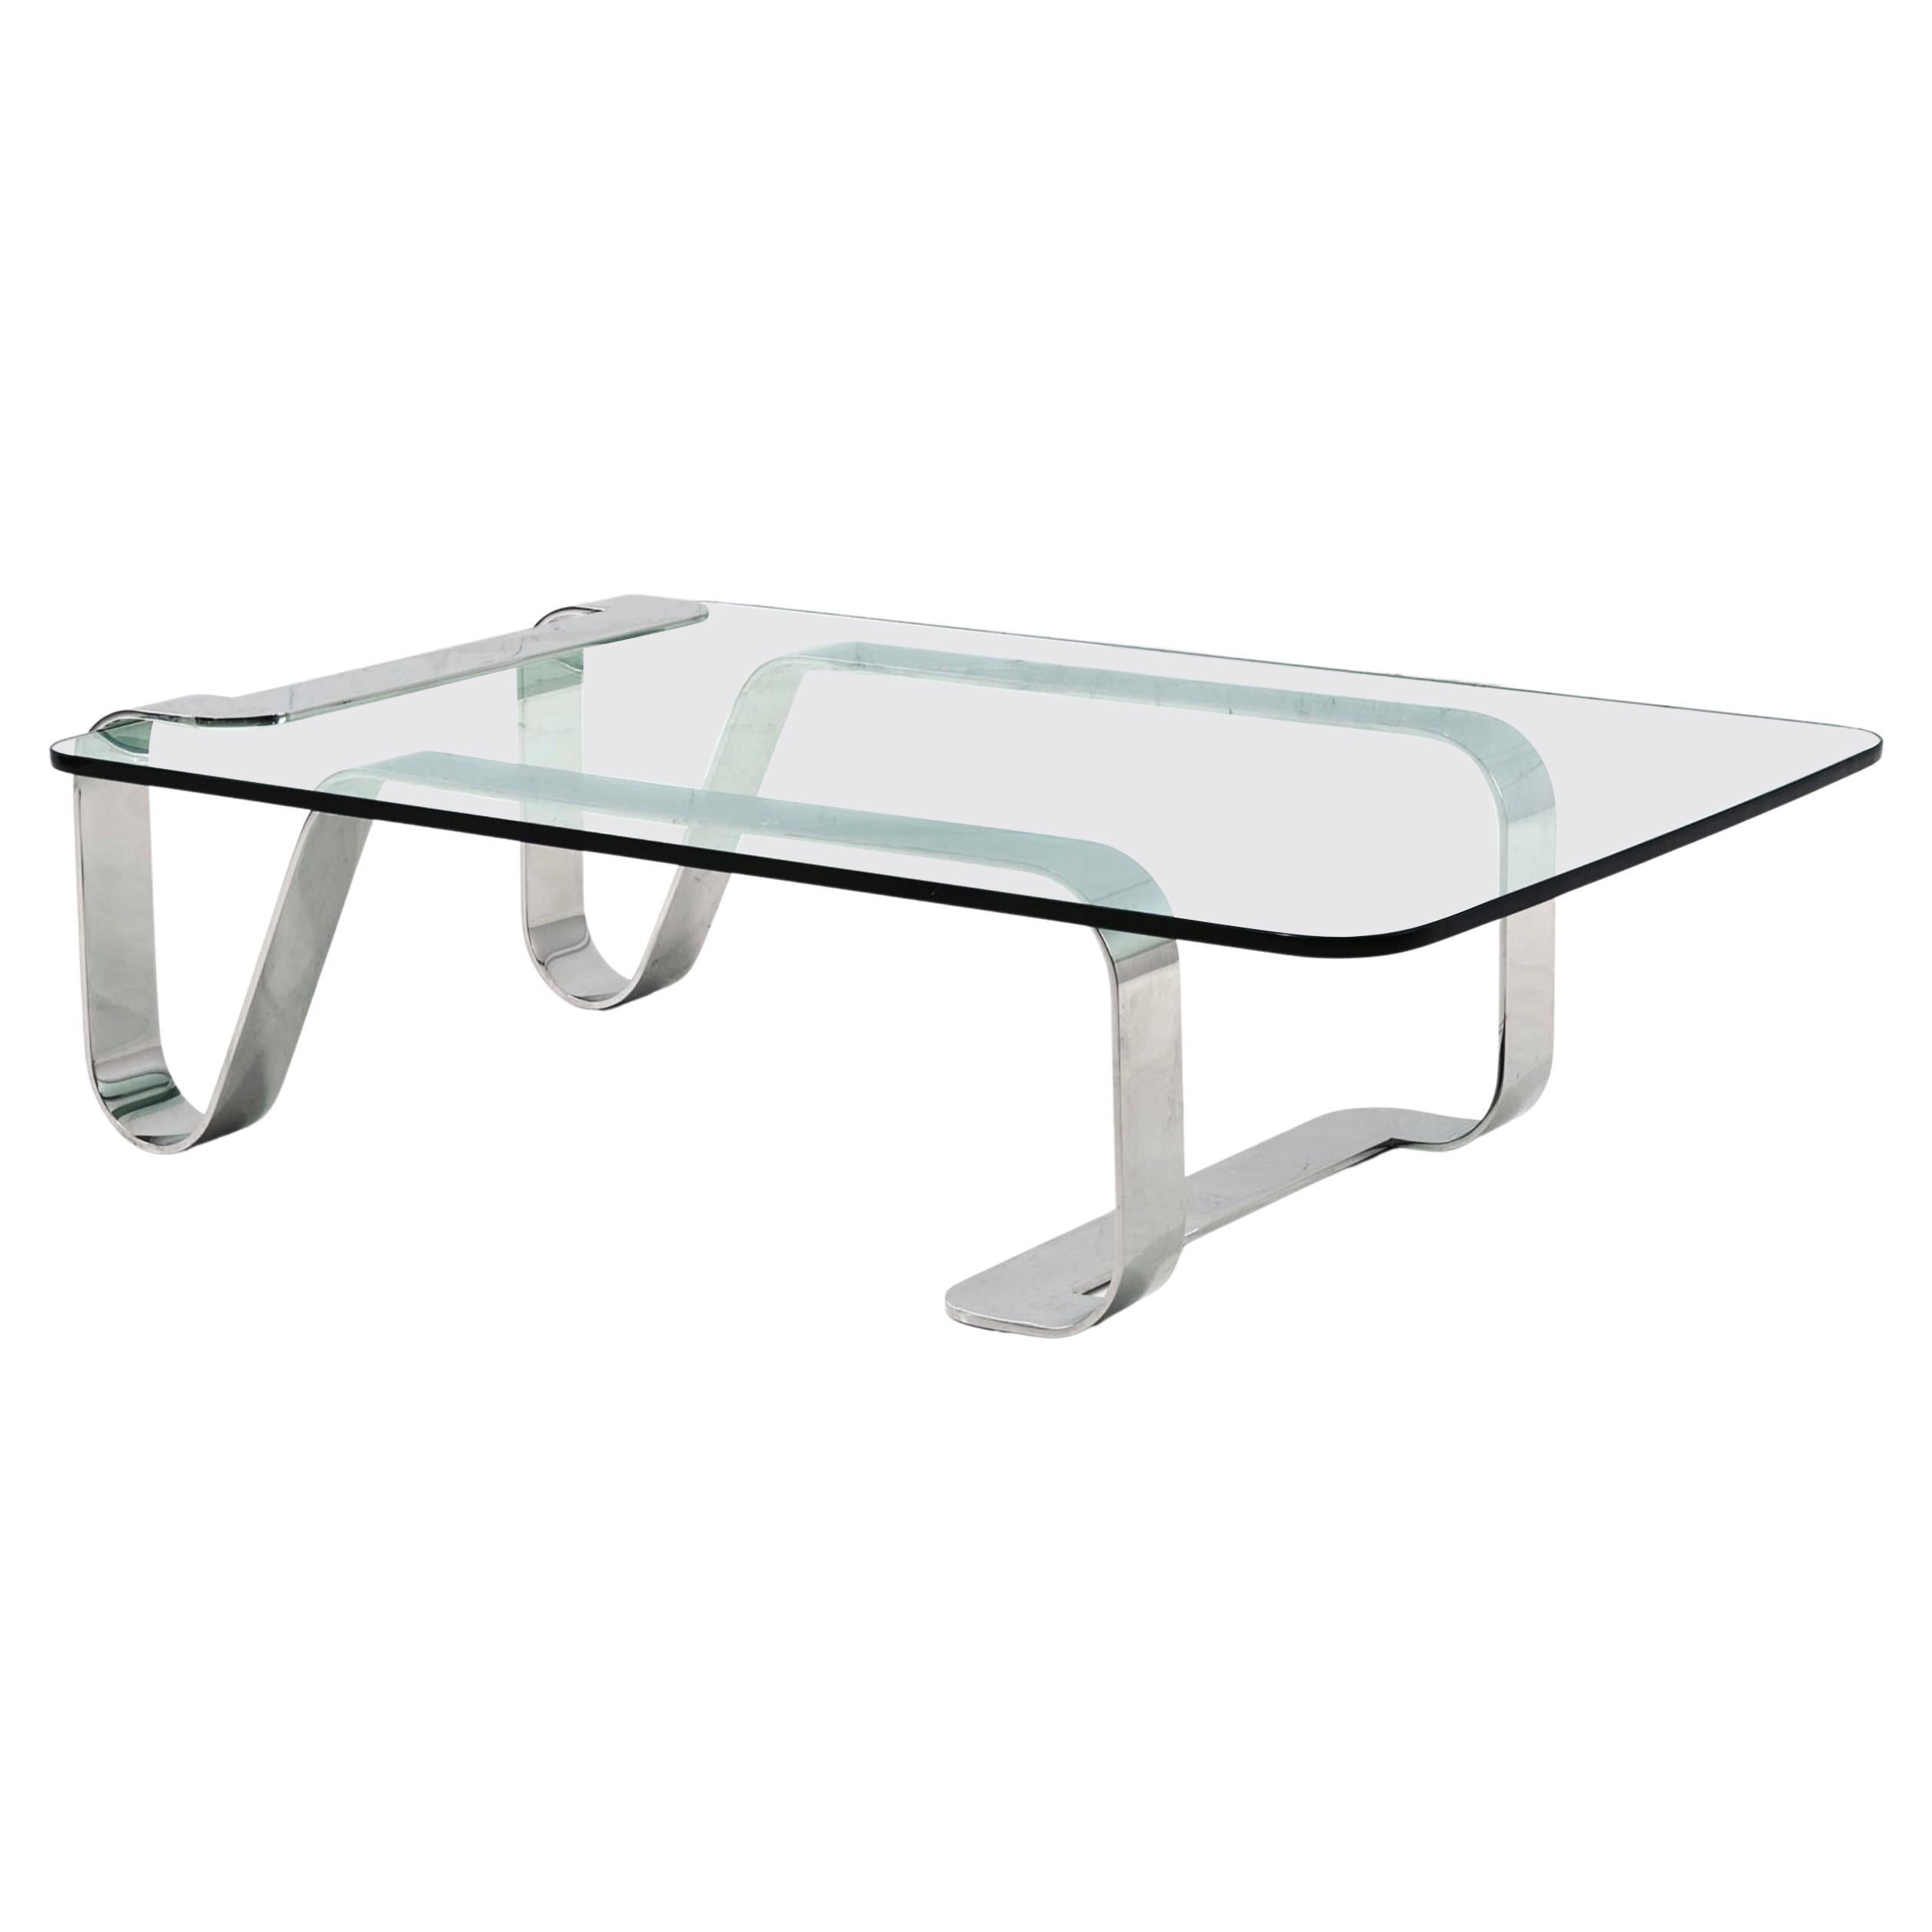 Steel and Glass "Odyssey" Coffee Table by Gary Gutterman, 1970